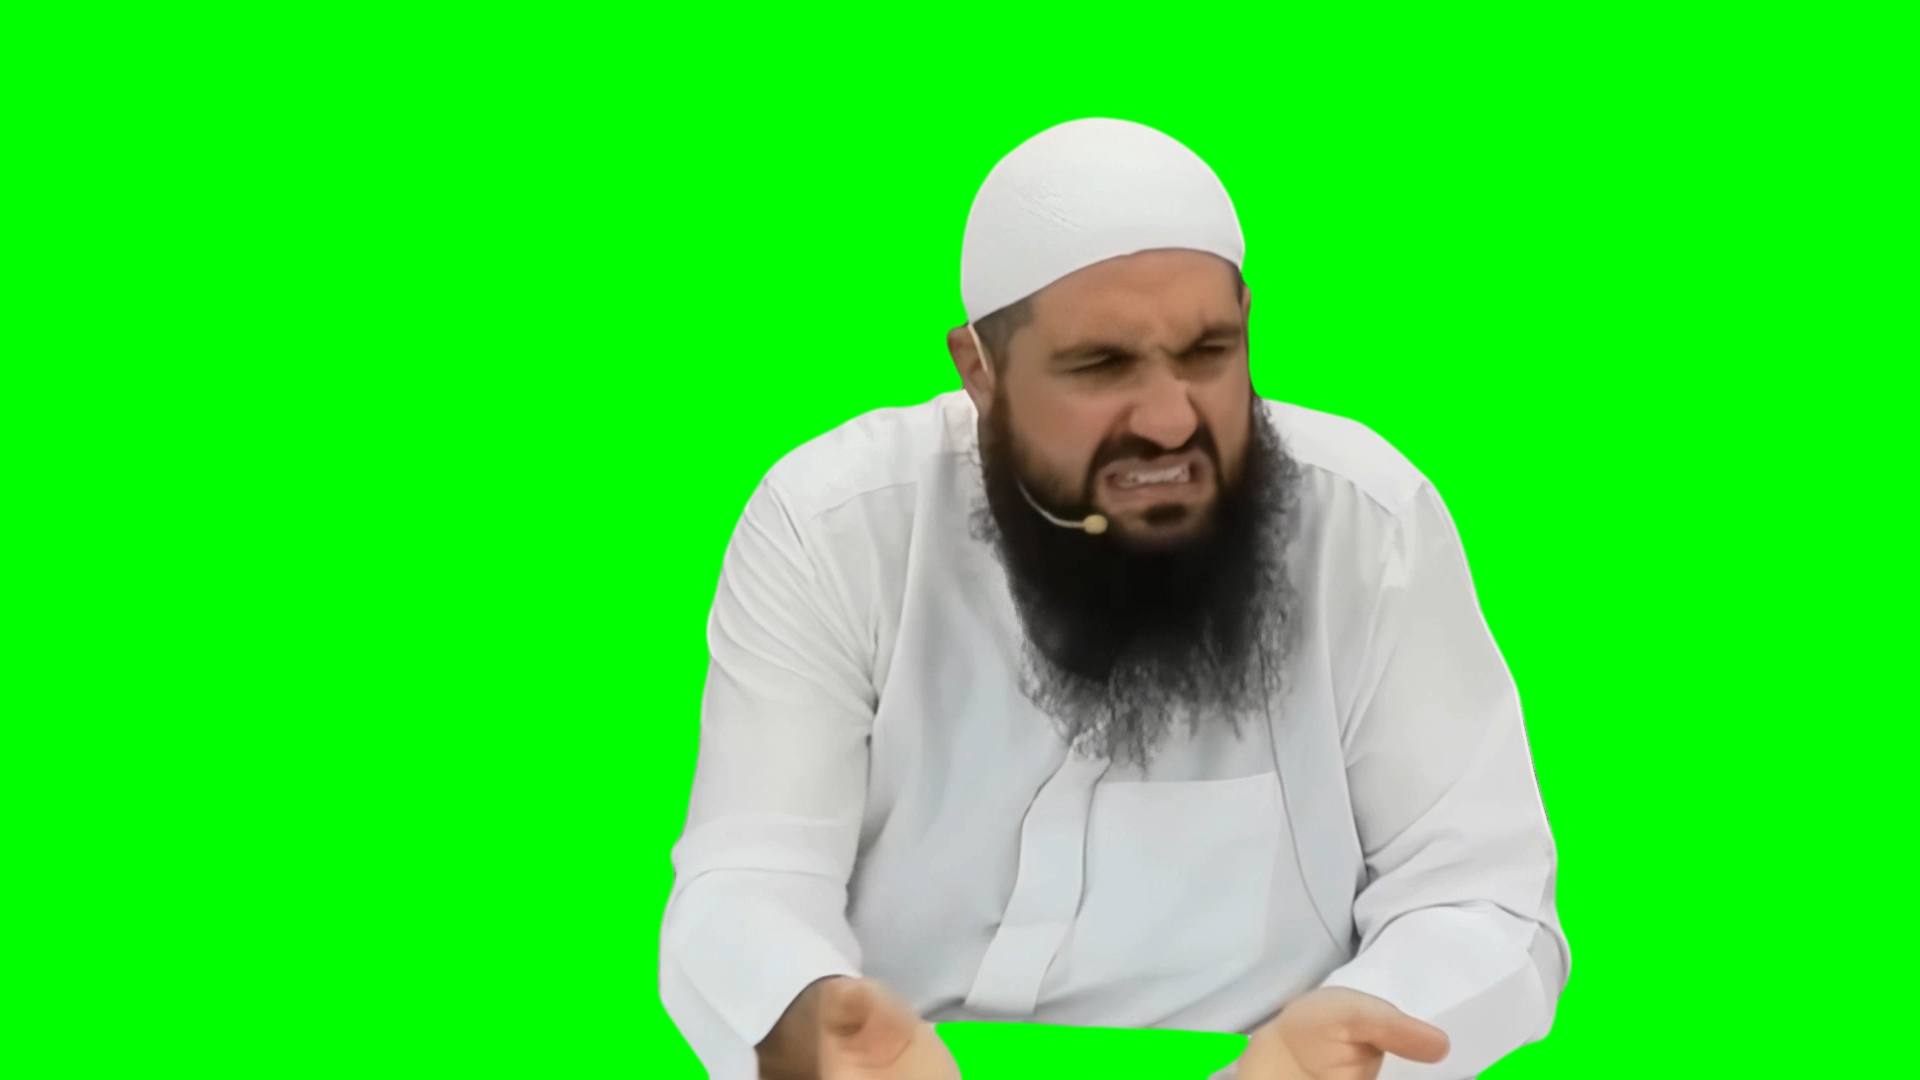 Brother ew! What's that brother?! meme (Green Screen)